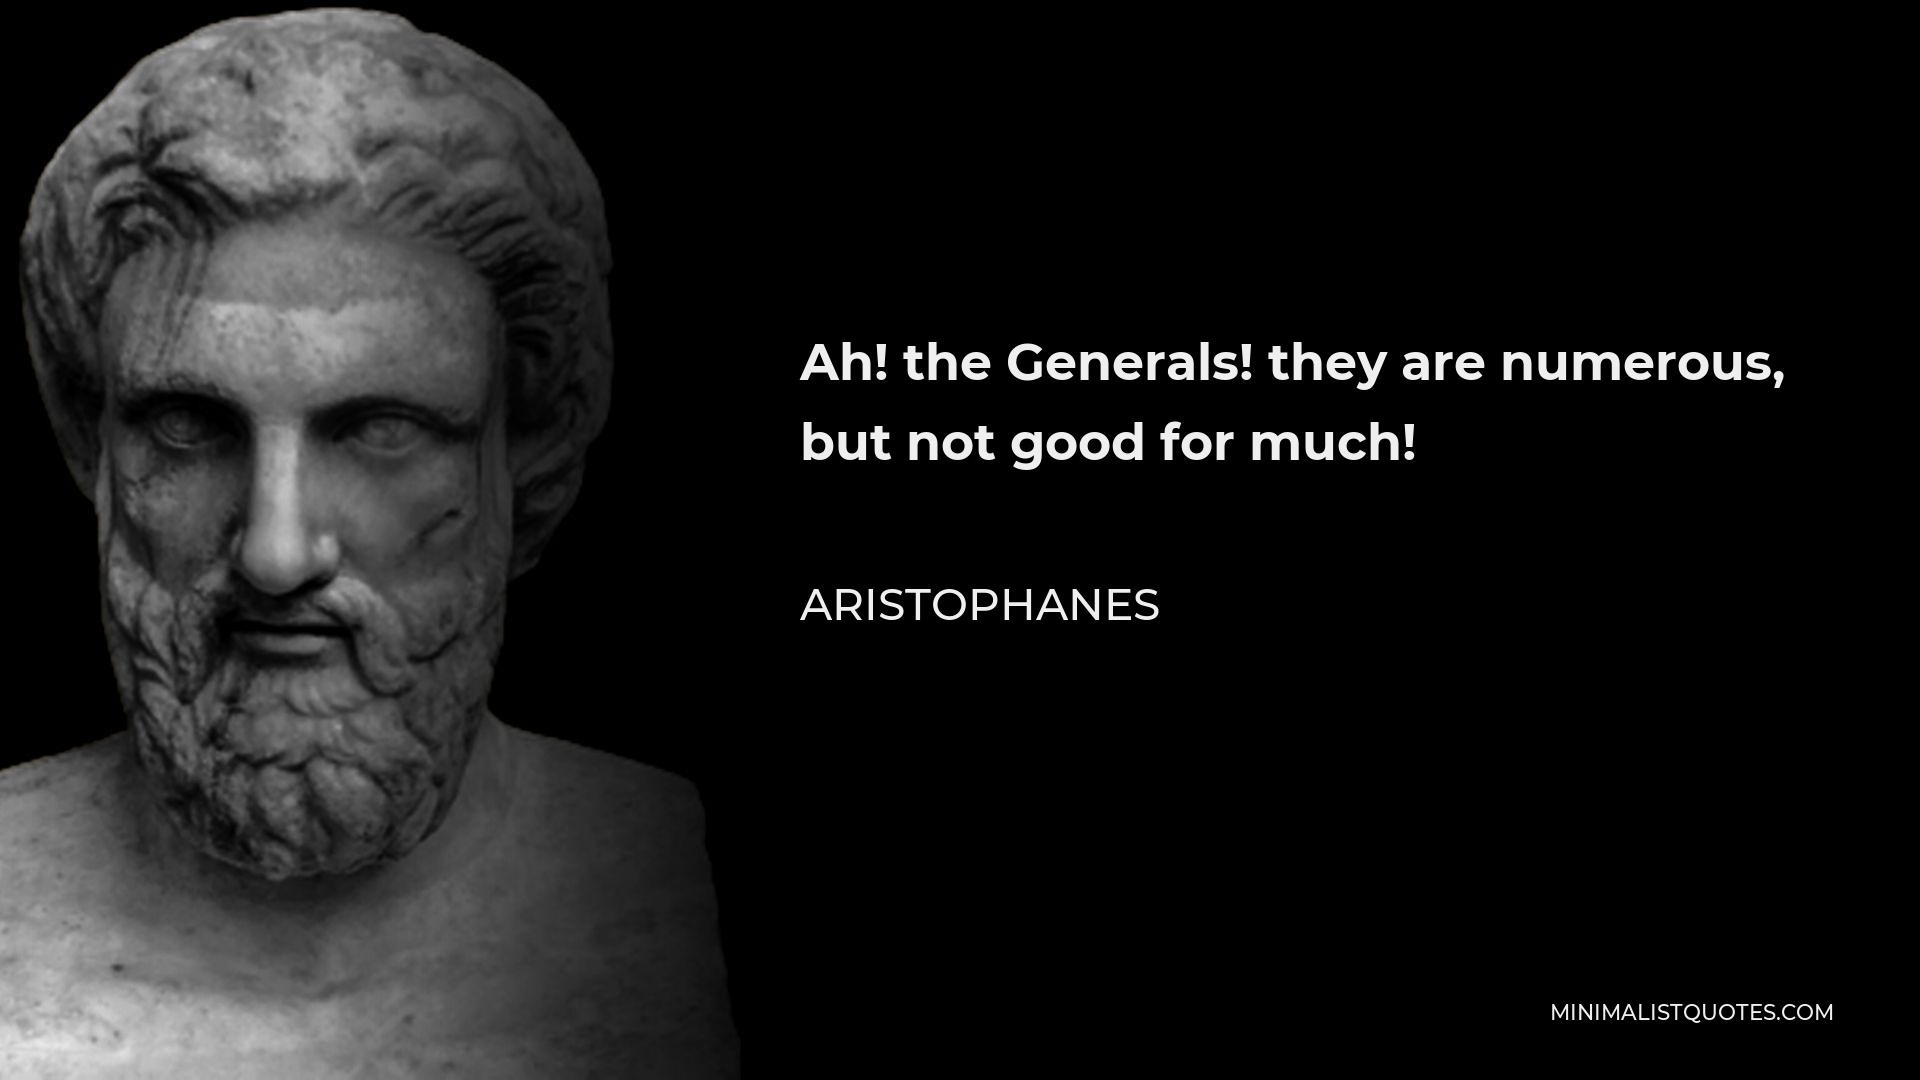 Aristophanes Quote - Ah! the Generals! they are numerous, but not good for much!